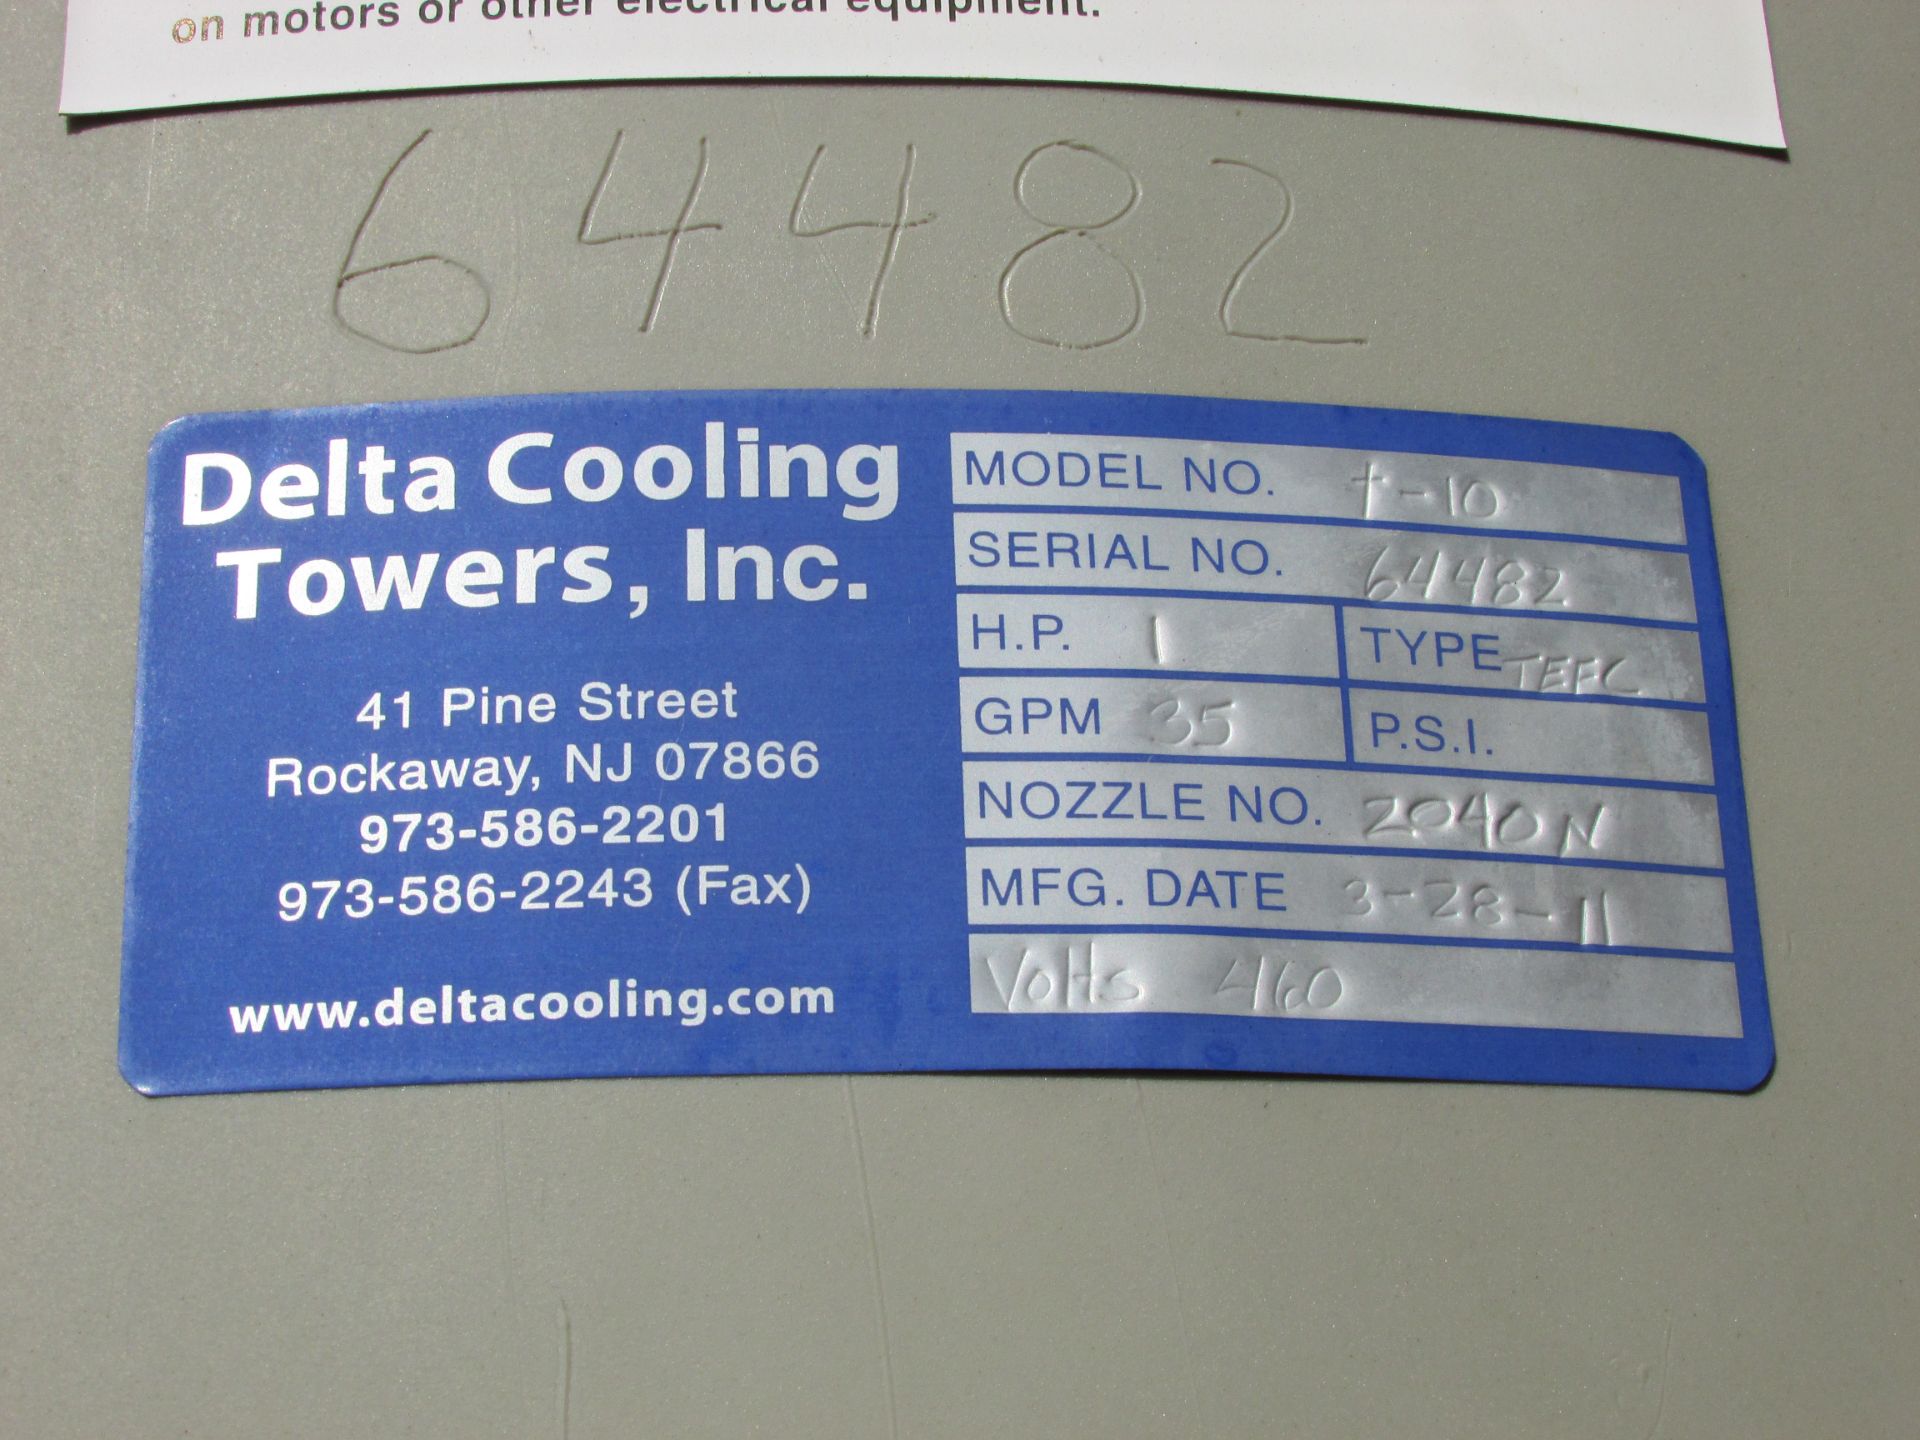 2011 Delta Cooling Towers T-10 1HP 35GPM Cooling Tower - Image 5 of 14